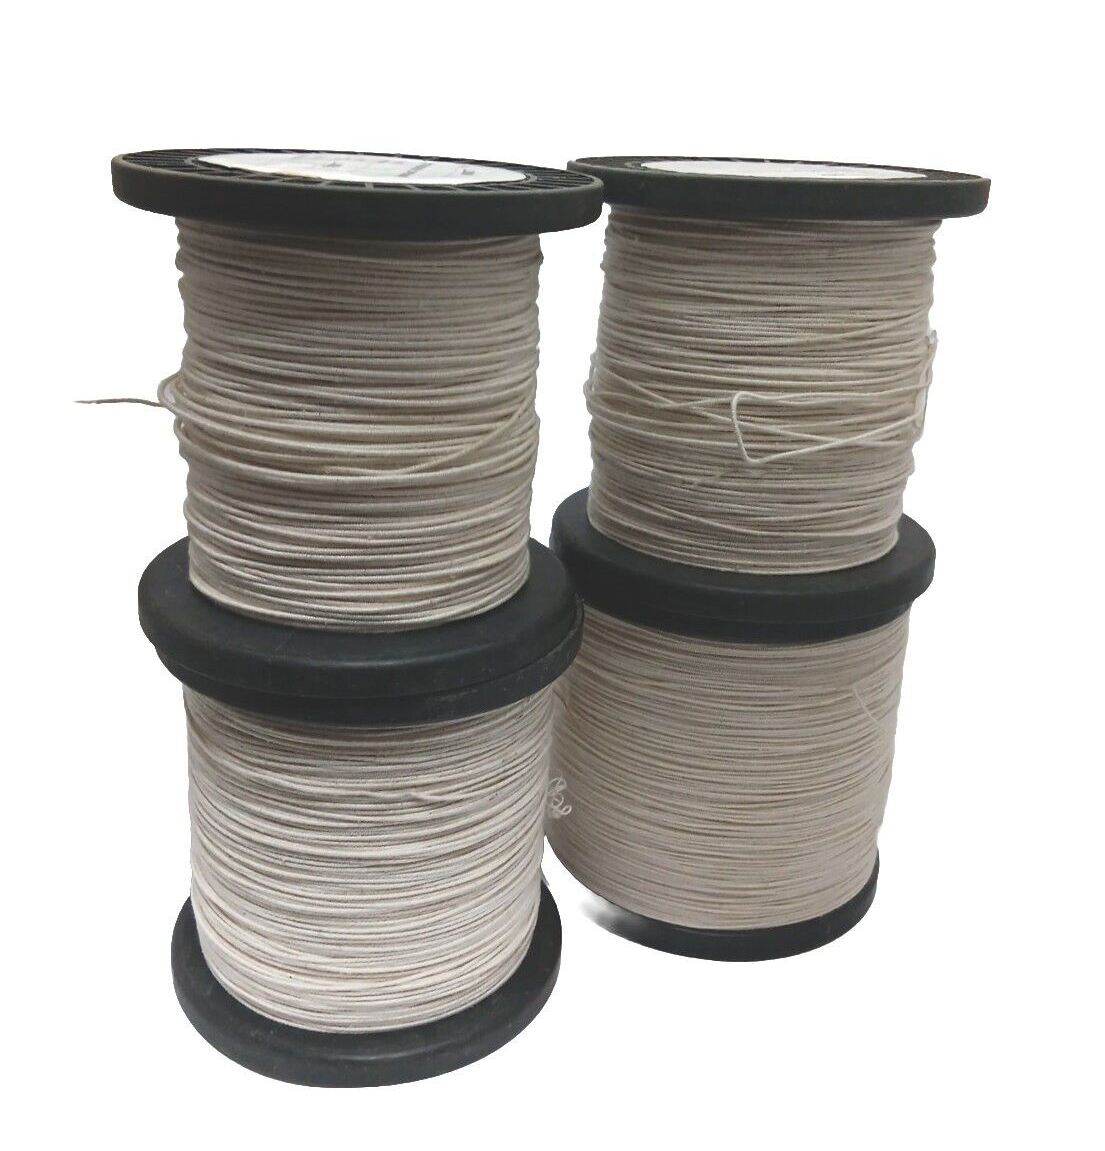 Kg 0.315mm Double Cotton Covered Copper Craft Wire